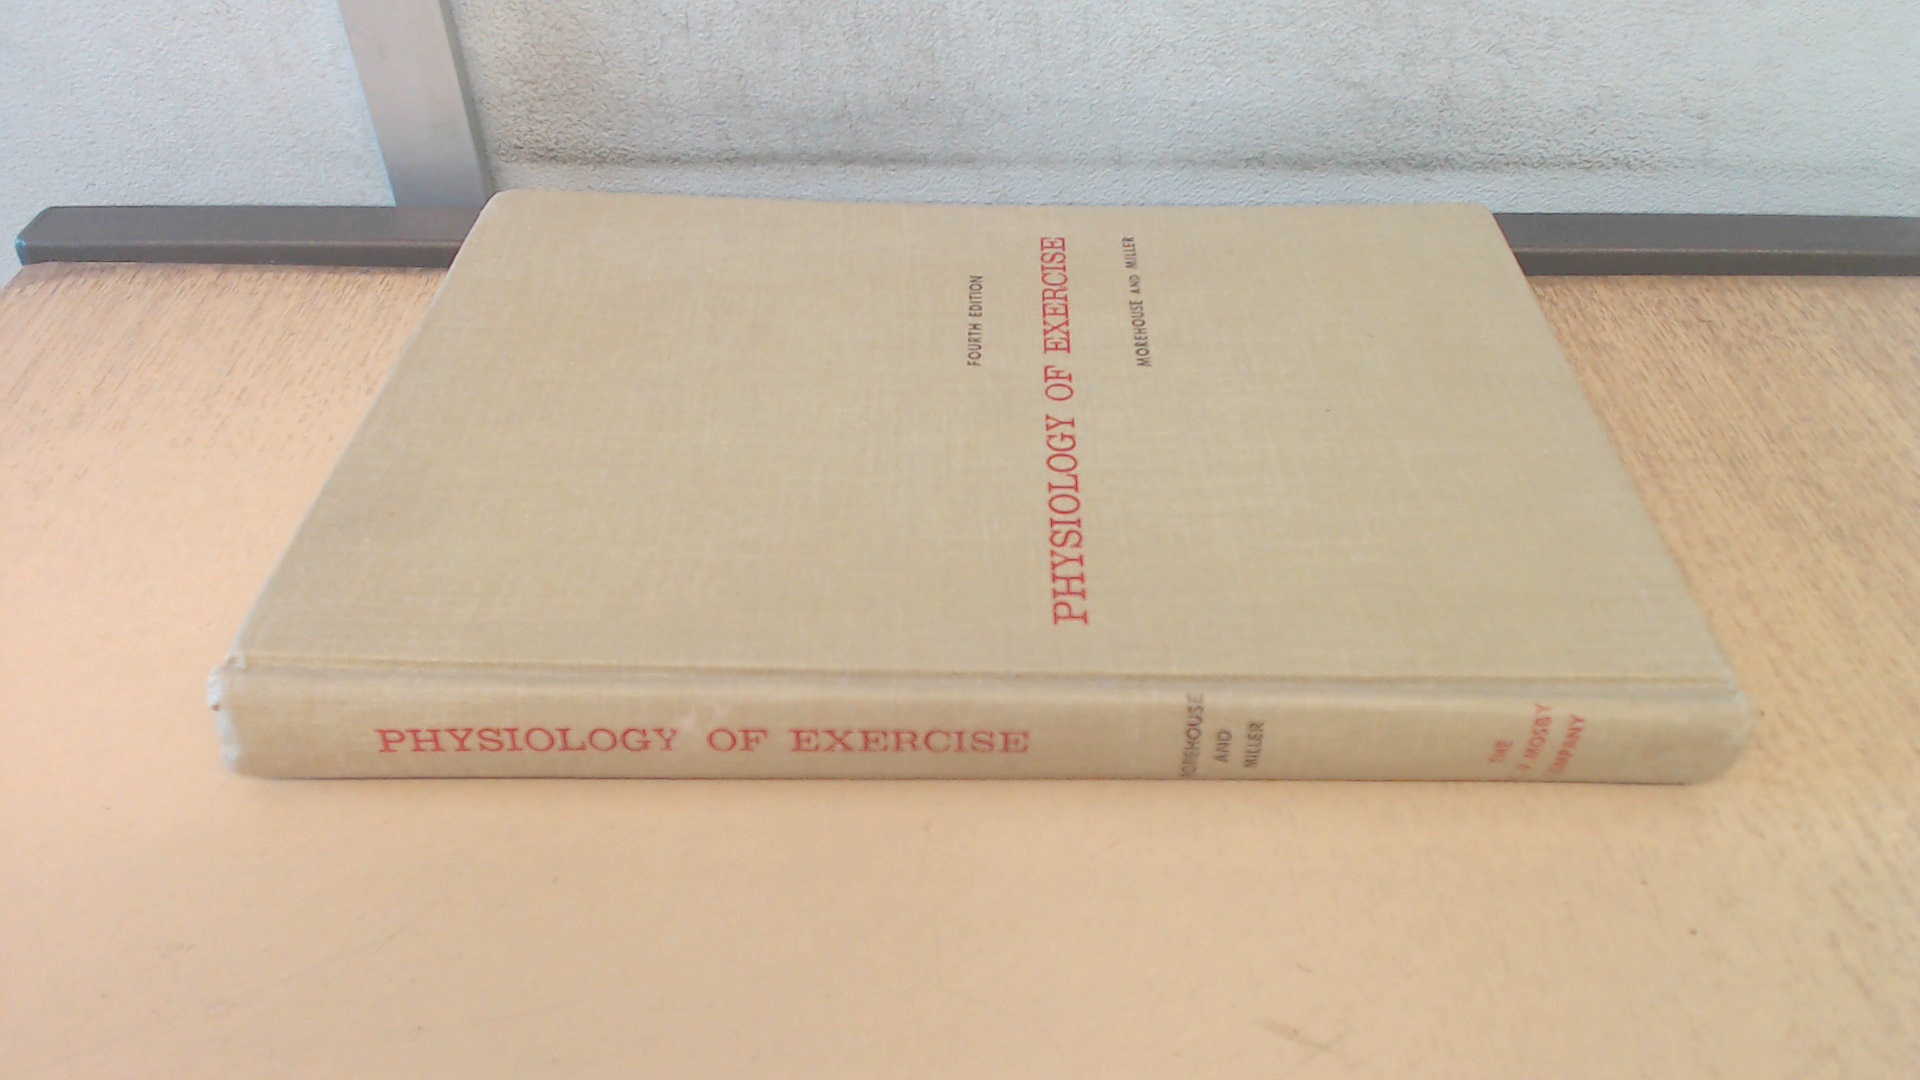 Physiology Of Exercise - Laurence E. Morehouse & Augustus T. Miller